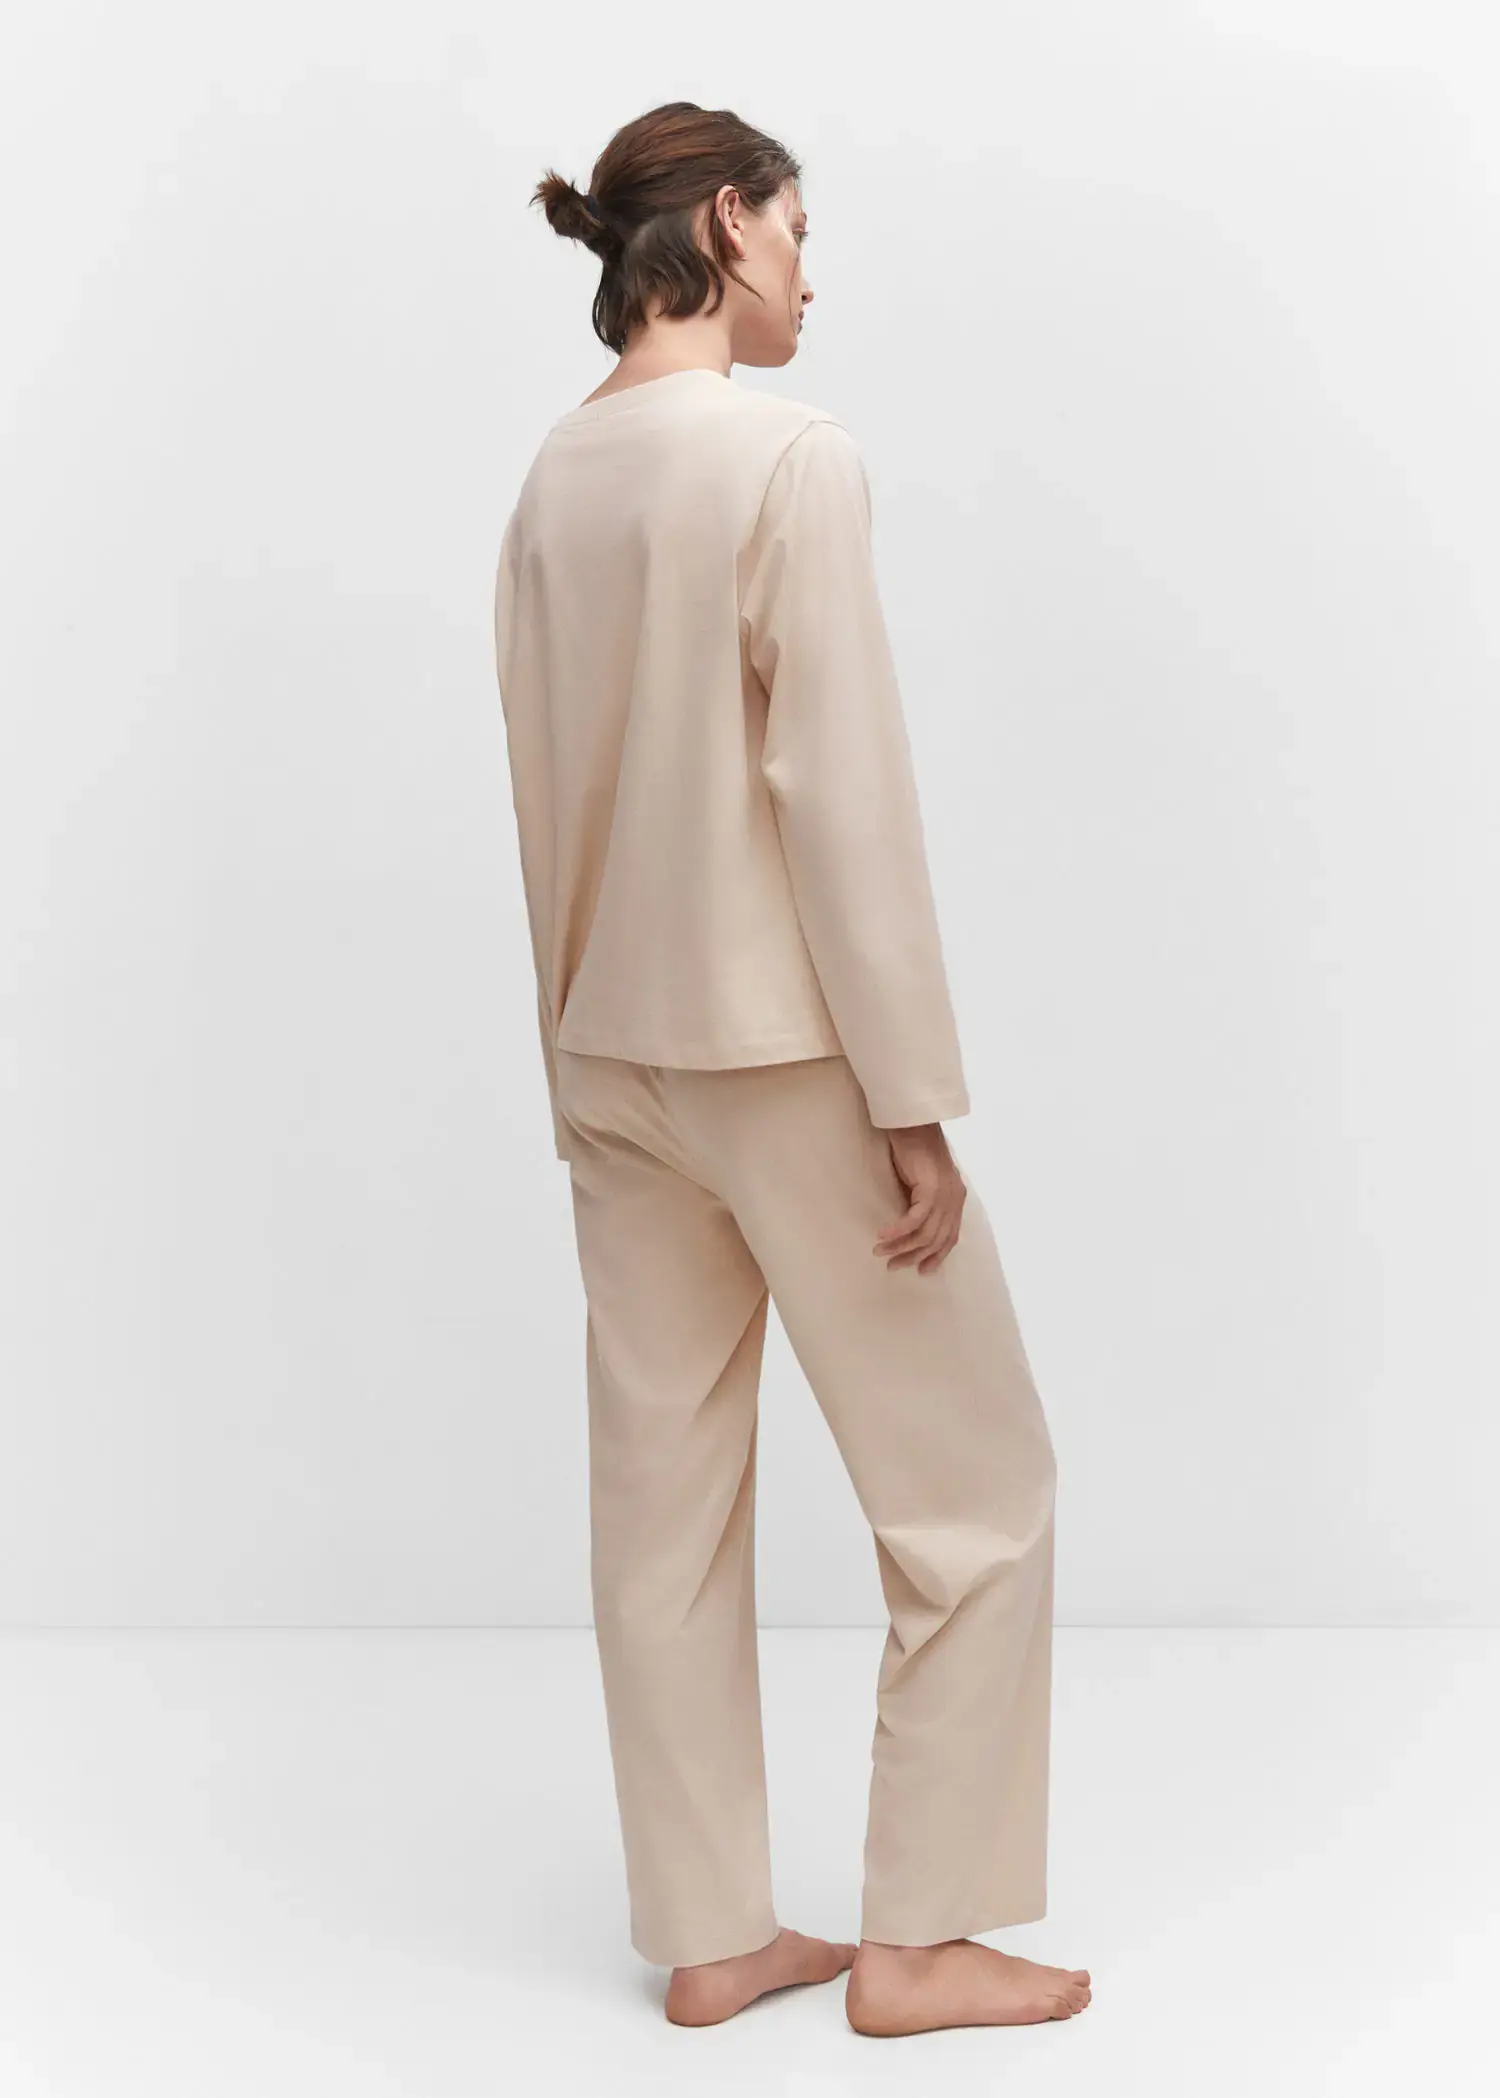 Mango Cotton long pyjamas. a person standing in a room wearing a suit. 